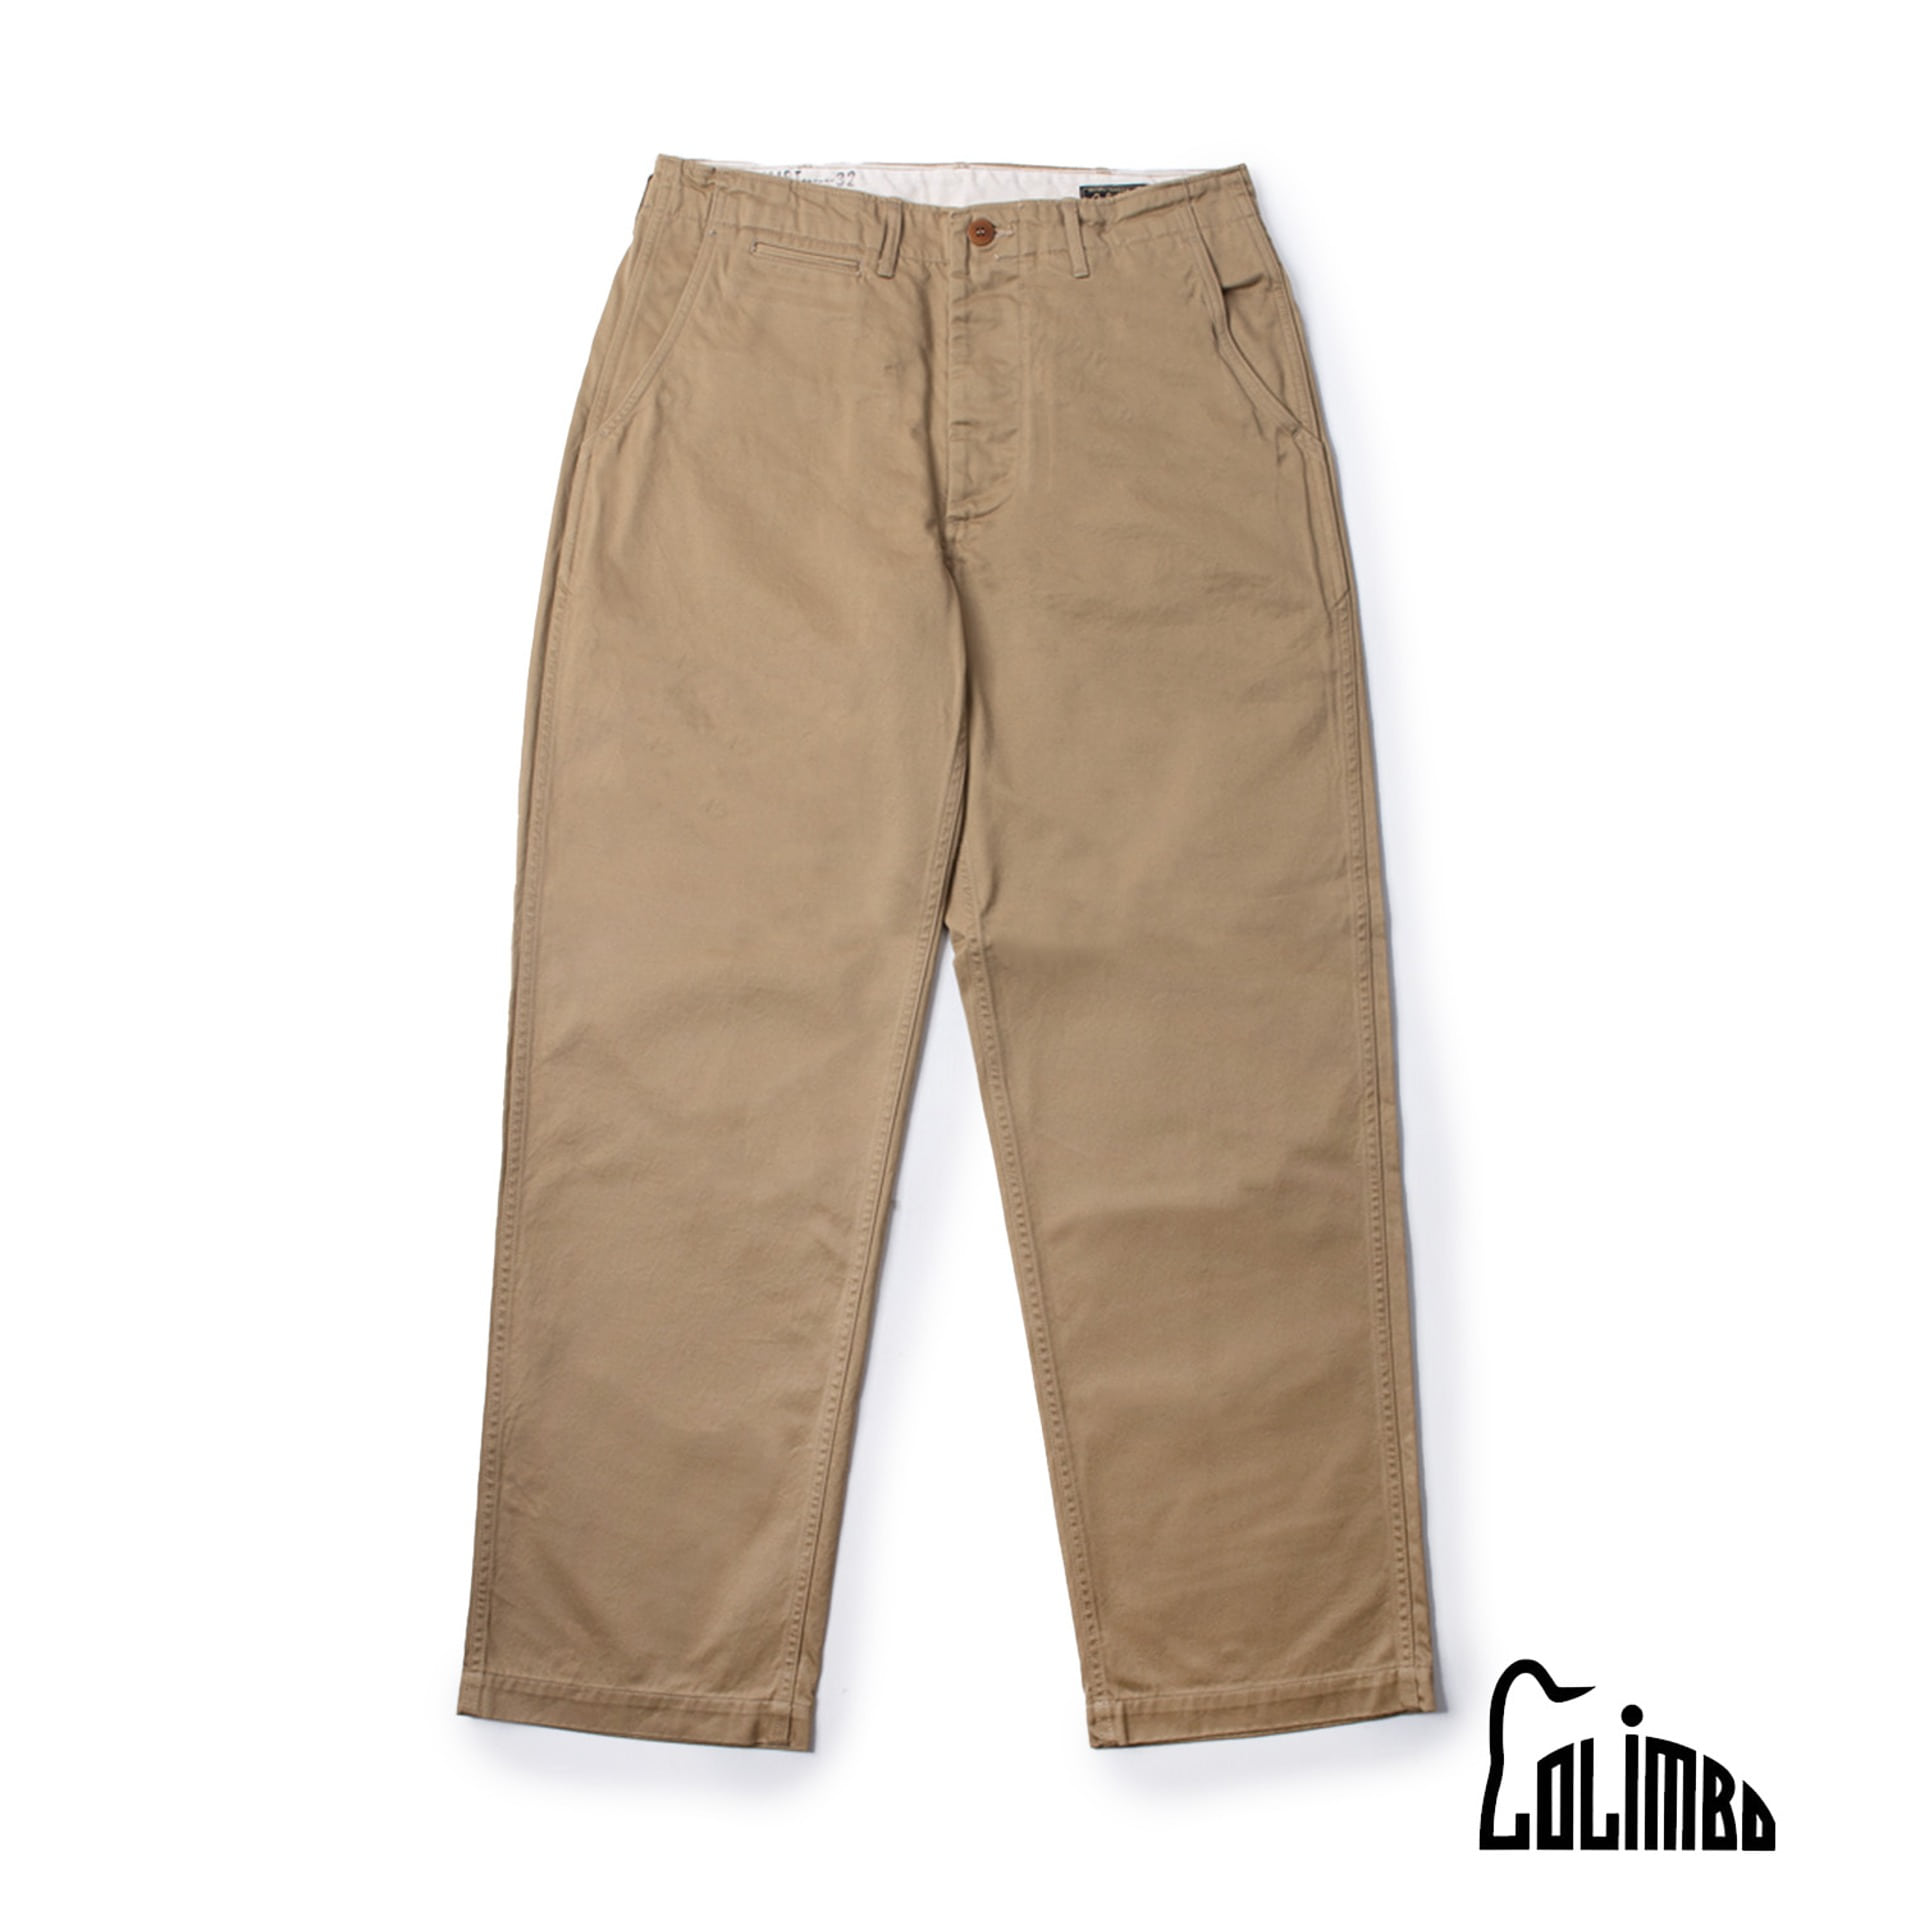 WEST-POINT CLOTH   OVERLAND CAMPAIGN TROUSERS  (Khaki)